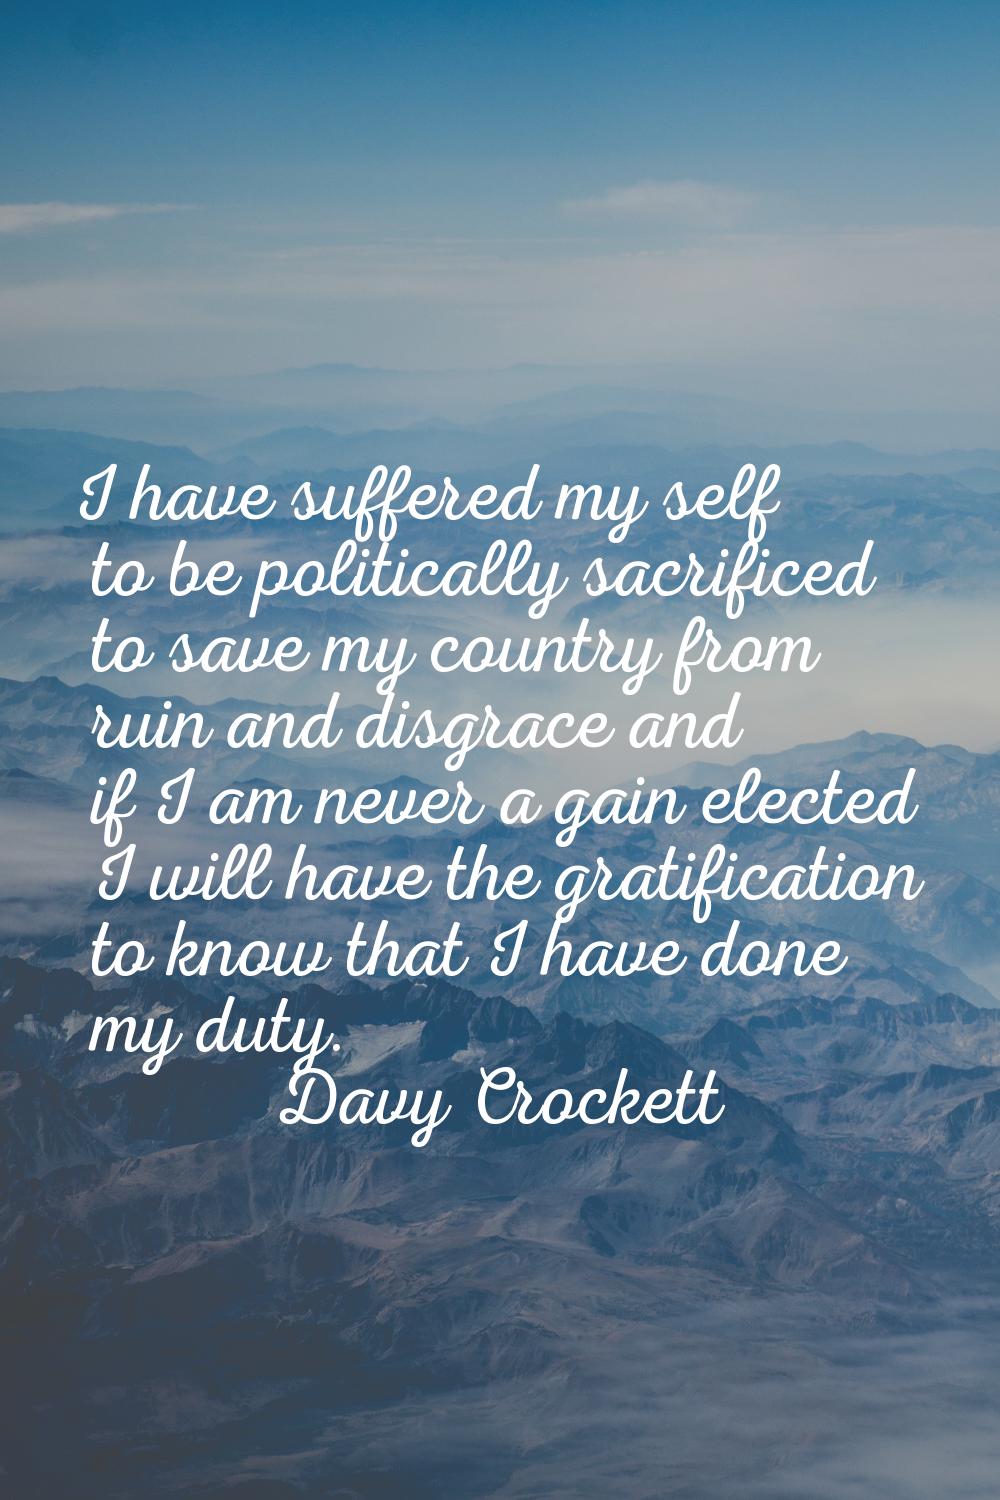 I have suffered my self to be politically sacrificed to save my country from ruin and disgrace and 